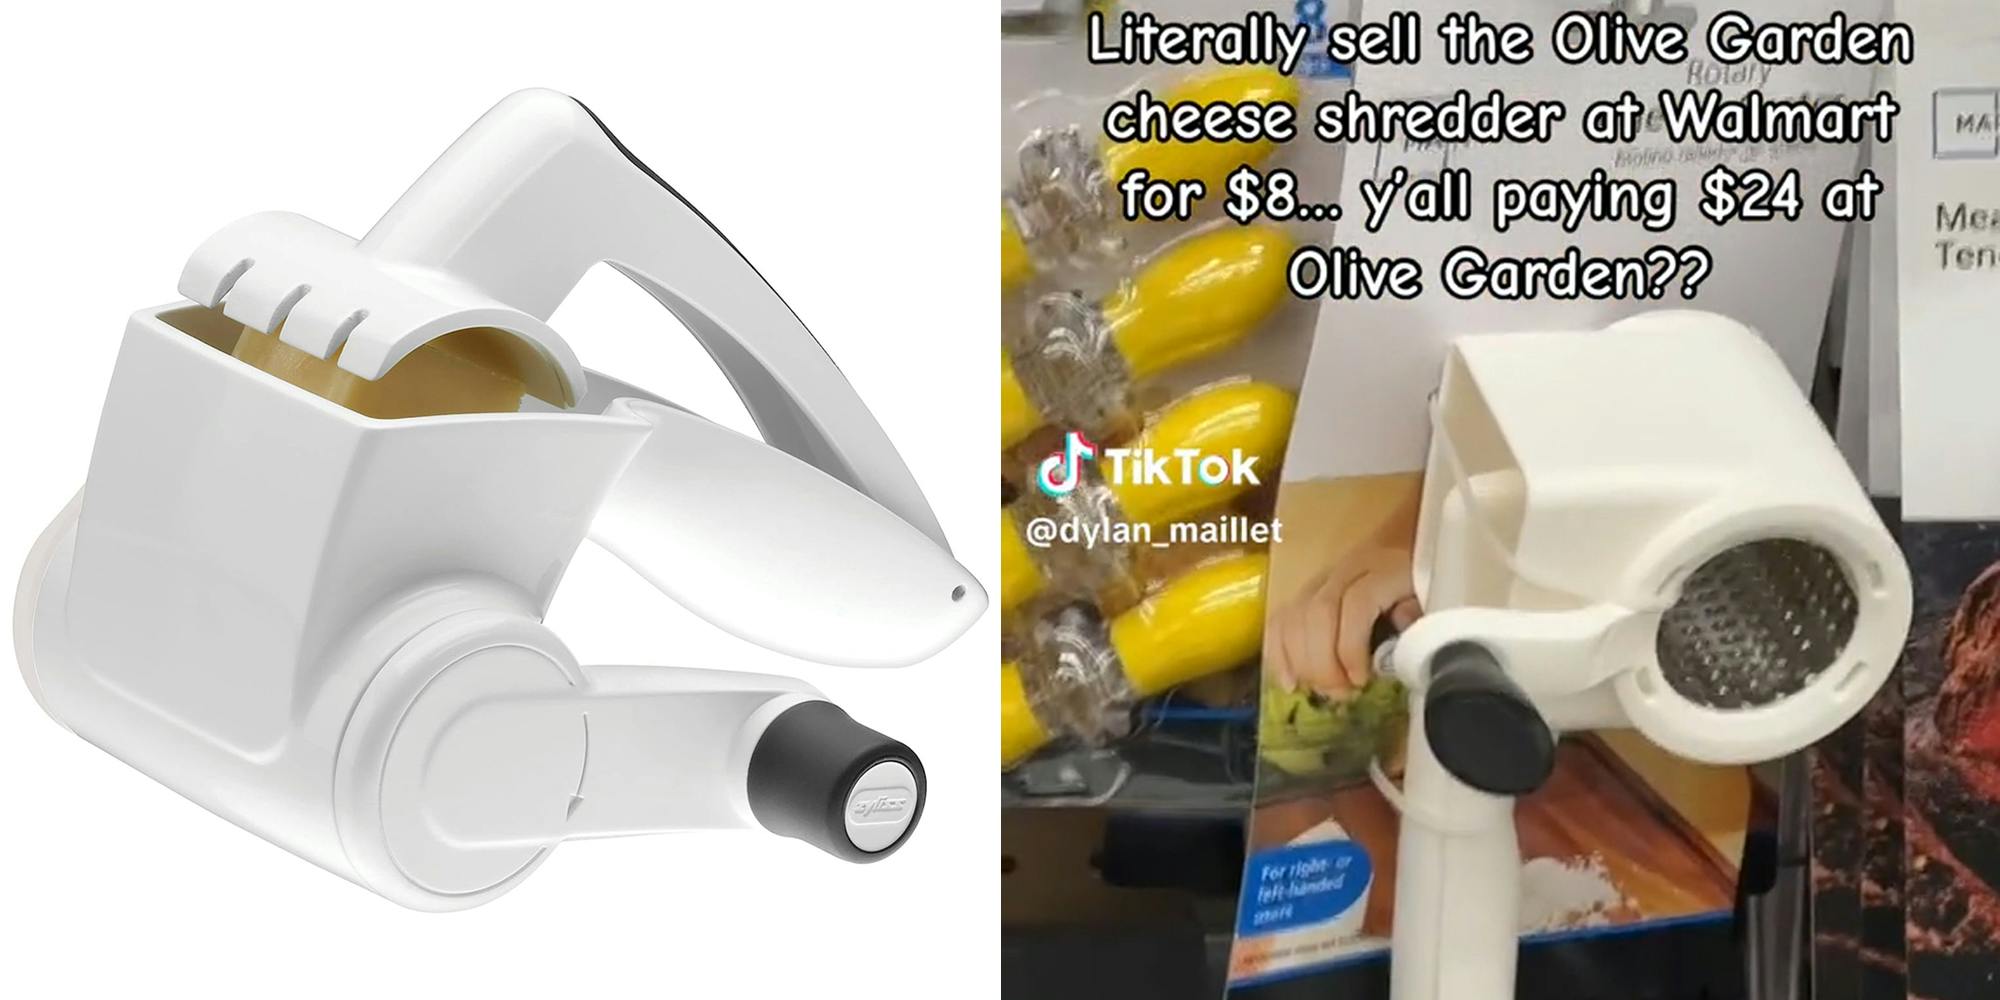 Shopper Claims Walmart Sells Olive Garden Cheese Grater for $8